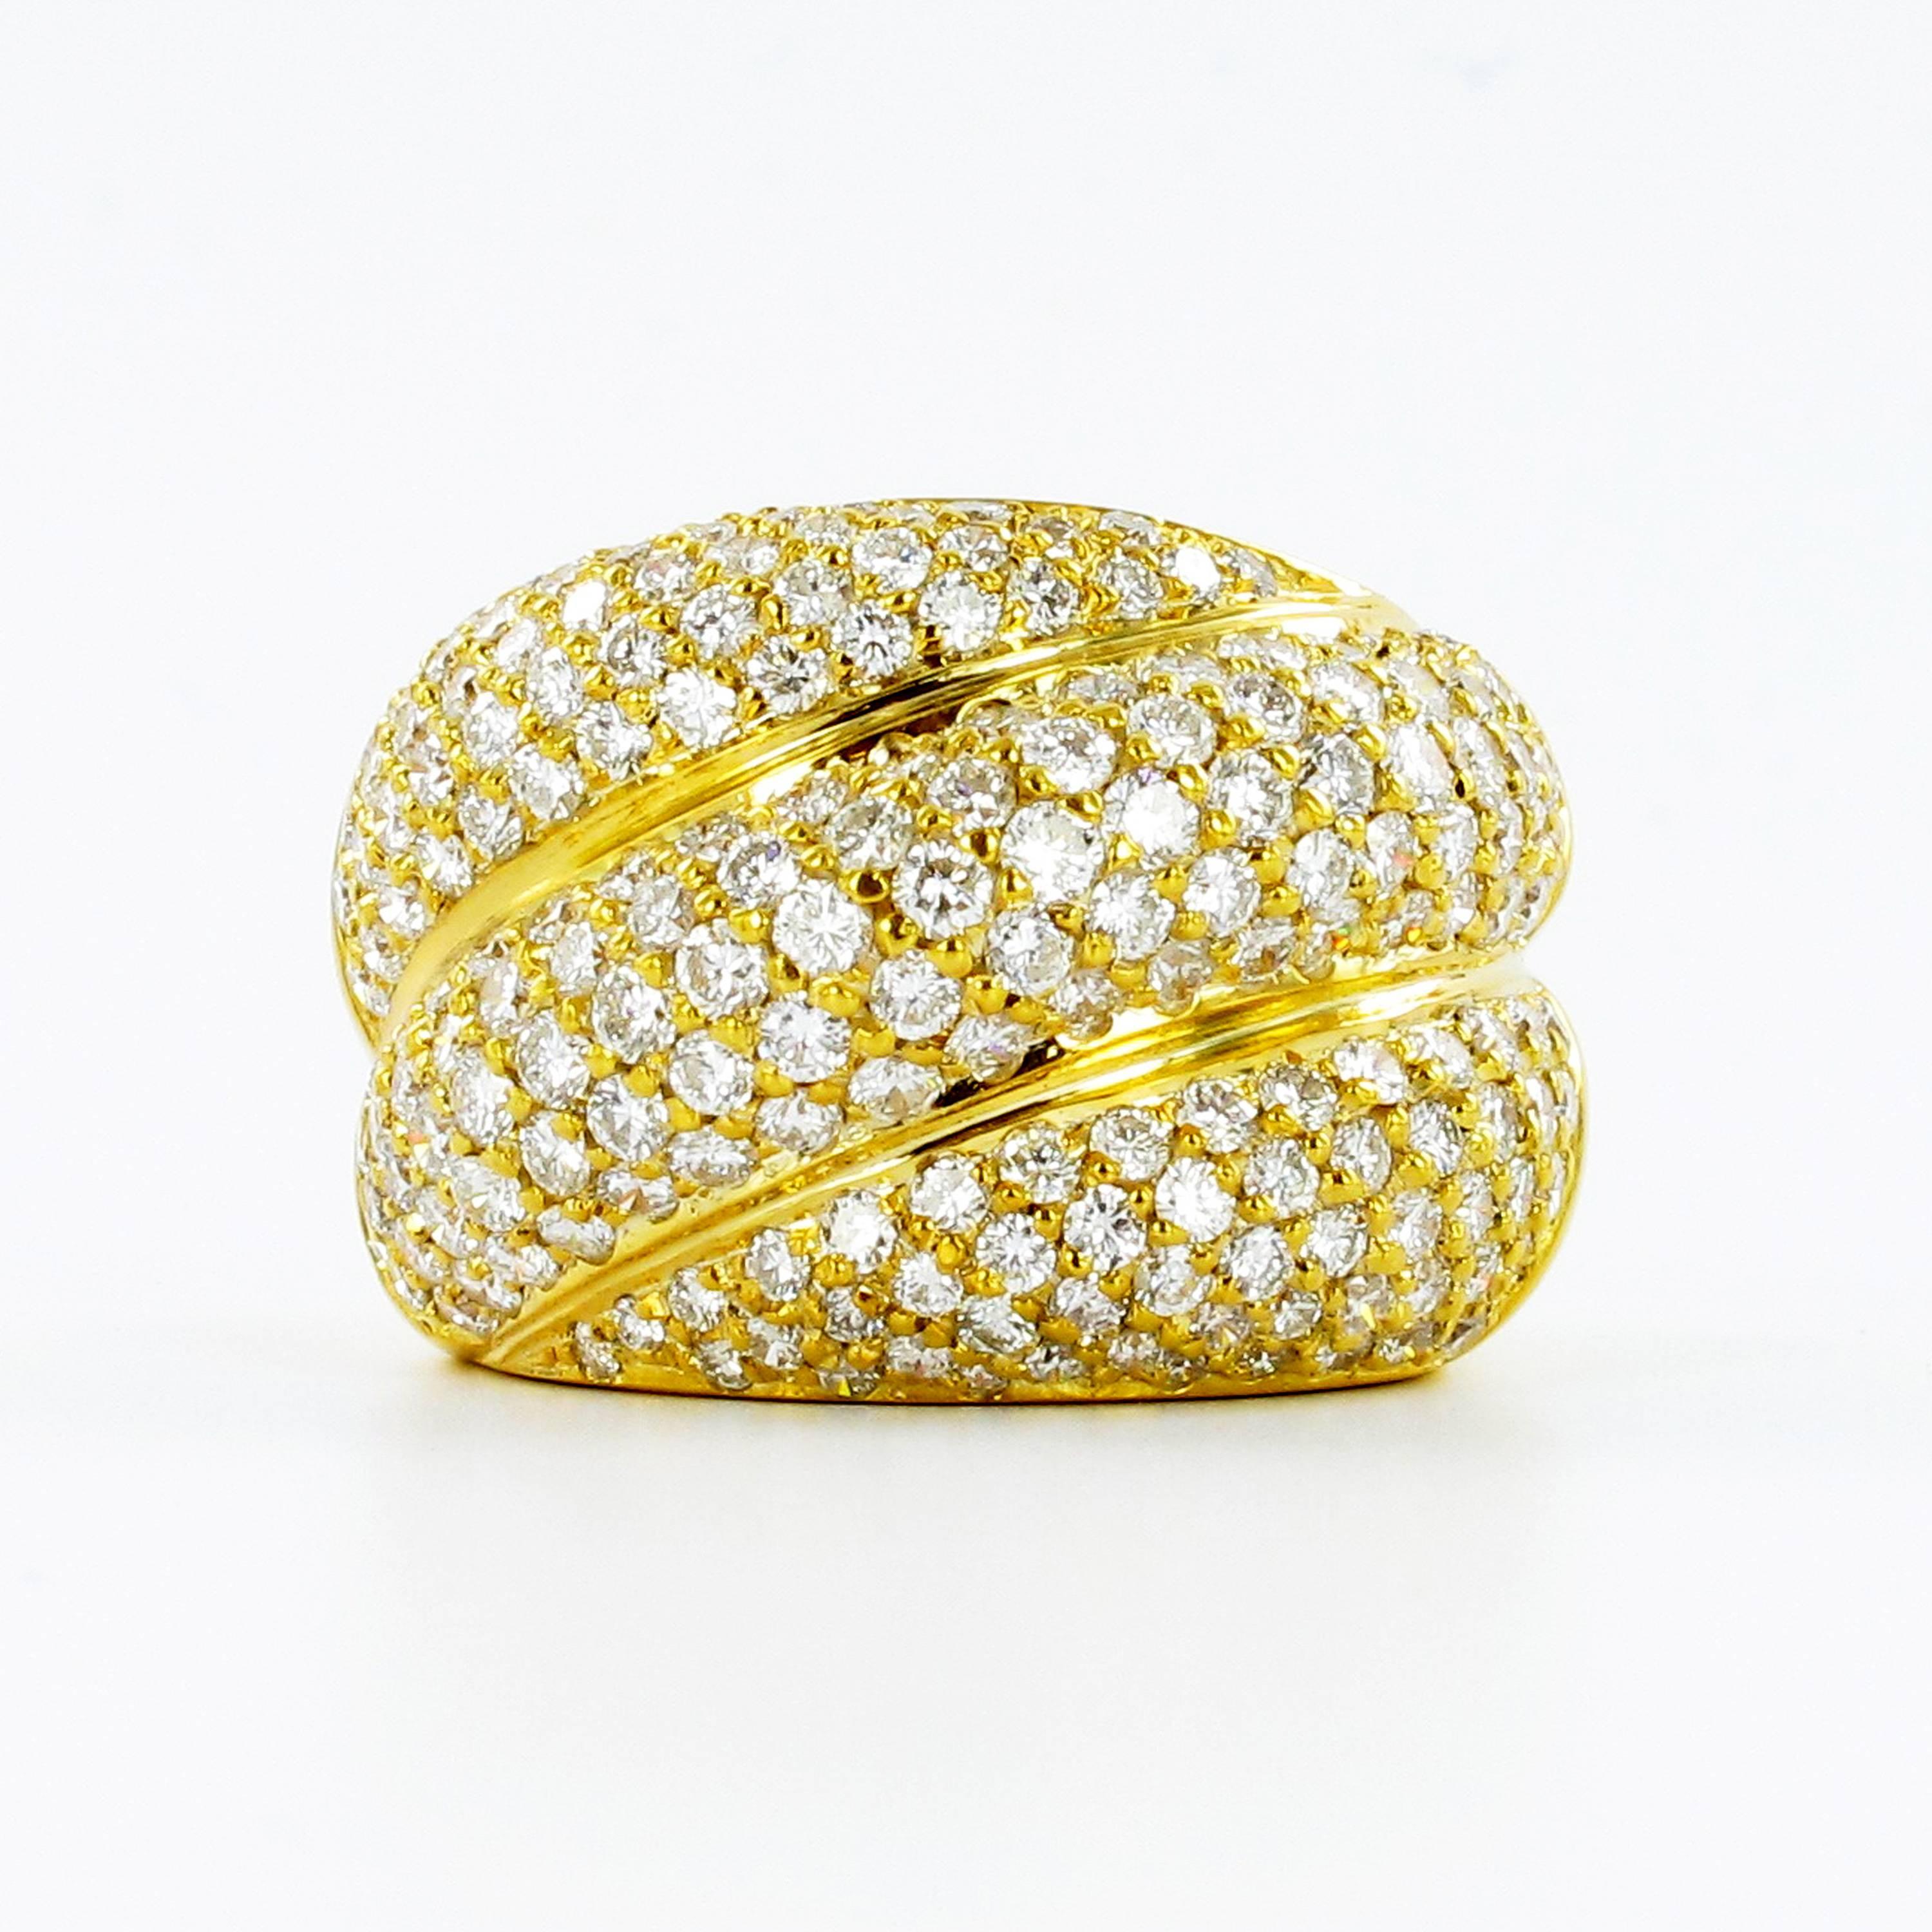 Classic diamond band ring in yellow gold 750. Pavé set with 190 brilliant cut diamonds totaling approximate 2.90 ct. The diamonds are of G/H color and si clarity. Assay mark for gold 750 and maker's mark. 

Matching pair of earclips on stock.

Ring